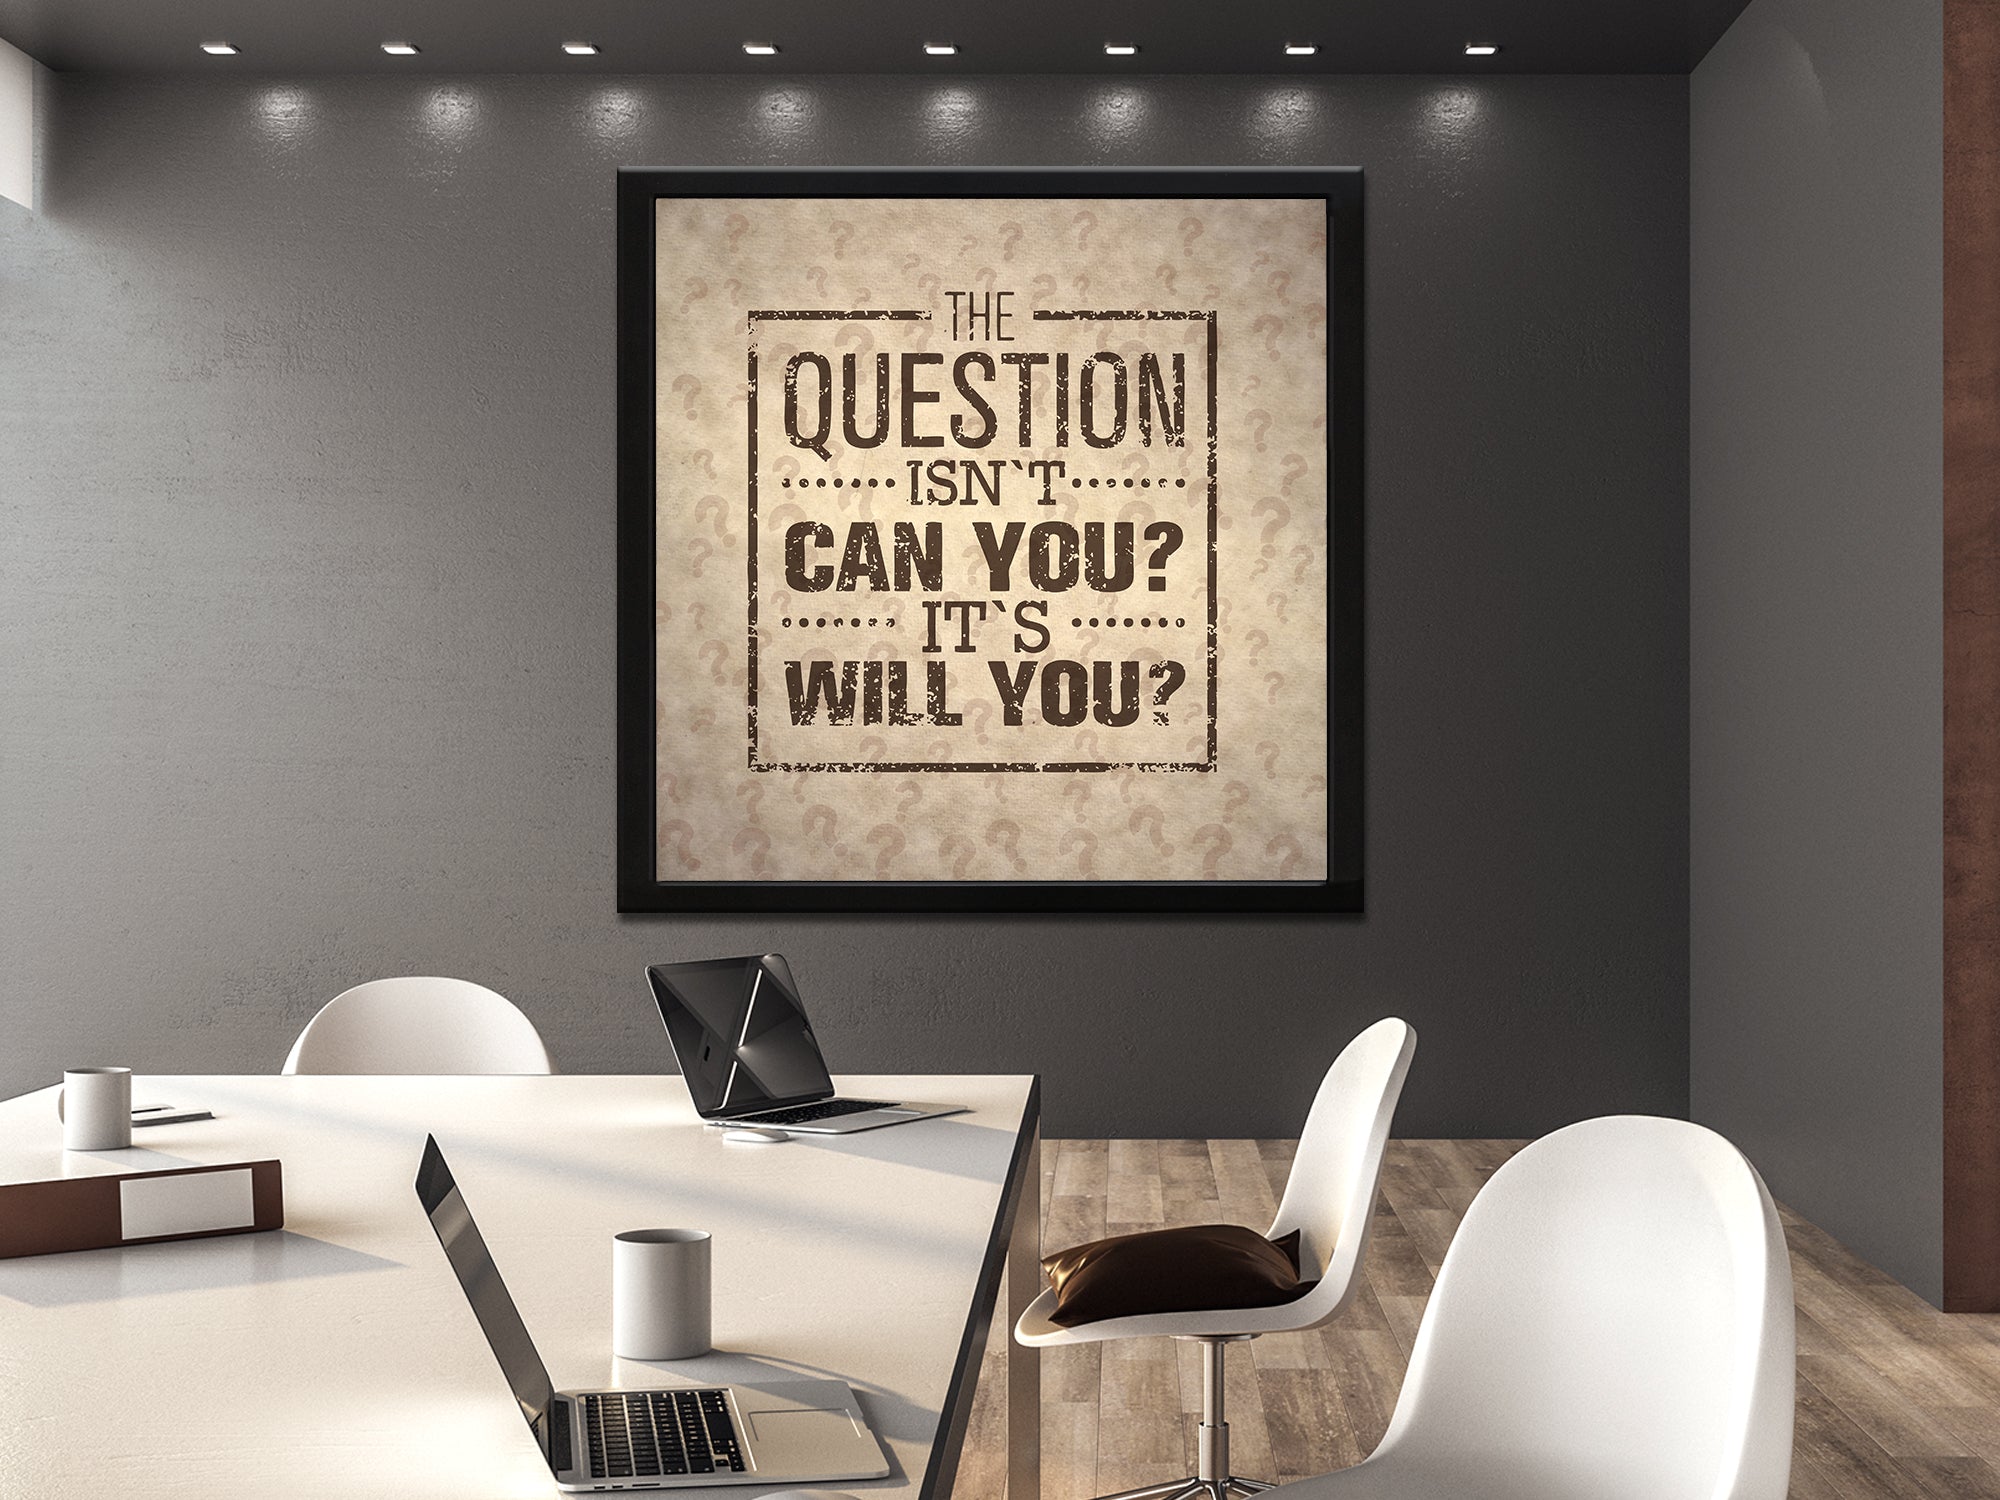 The Question Isn't CAN YOU? It's WILL YOU? Canvas Wall Art